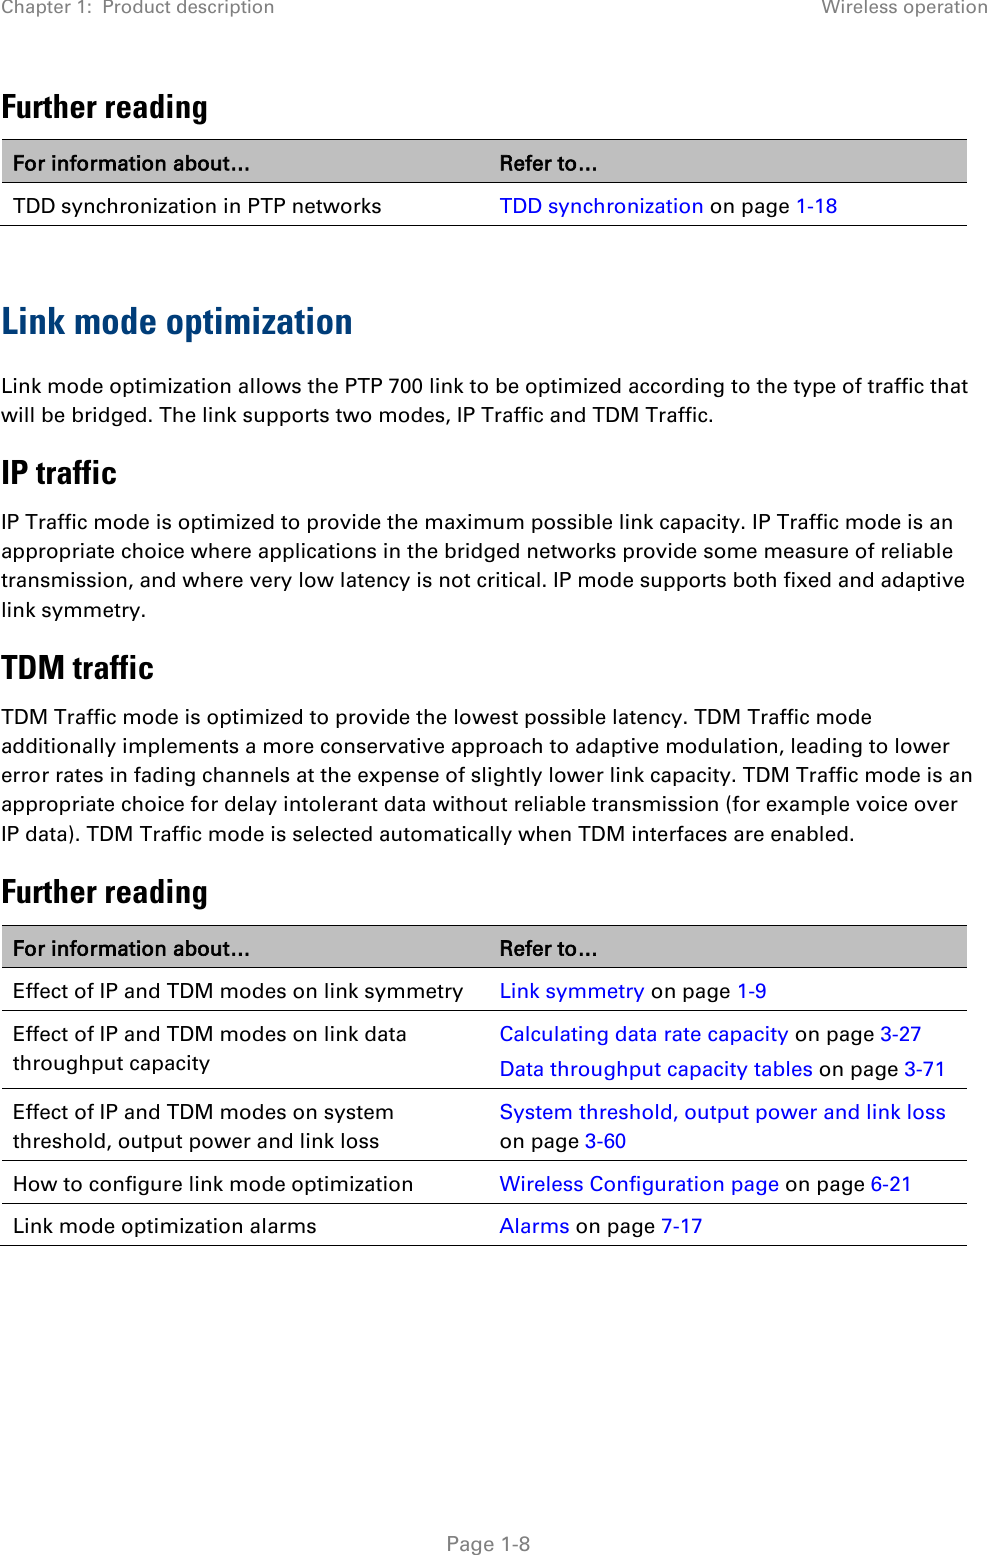 Chapter 1:  Product description Wireless operation  Further reading For information about… Refer to… TDD synchronization in PTP networks TDD synchronization on page 1-18  Link mode optimization Link mode optimization allows the PTP 700 link to be optimized according to the type of traffic that will be bridged. The link supports two modes, IP Traffic and TDM Traffic. IP traffic IP Traffic mode is optimized to provide the maximum possible link capacity. IP Traffic mode is an appropriate choice where applications in the bridged networks provide some measure of reliable transmission, and where very low latency is not critical. IP mode supports both fixed and adaptive link symmetry. TDM traffic TDM Traffic mode is optimized to provide the lowest possible latency. TDM Traffic mode additionally implements a more conservative approach to adaptive modulation, leading to lower error rates in fading channels at the expense of slightly lower link capacity. TDM Traffic mode is an appropriate choice for delay intolerant data without reliable transmission (for example voice over IP data). TDM Traffic mode is selected automatically when TDM interfaces are enabled. Further reading For information about… Refer to… Effect of IP and TDM modes on link symmetry Link symmetry on page 1-9 Effect of IP and TDM modes on link data throughput capacity Calculating data rate capacity on page 3-27 Data throughput capacity tables on page 3-71 Effect of IP and TDM modes on system threshold, output power and link loss System threshold, output power and link loss on page 3-60 How to configure link mode optimization Wireless Configuration page on page 6-21 Link mode optimization alarms Alarms on page 7-17   Page 1-8 